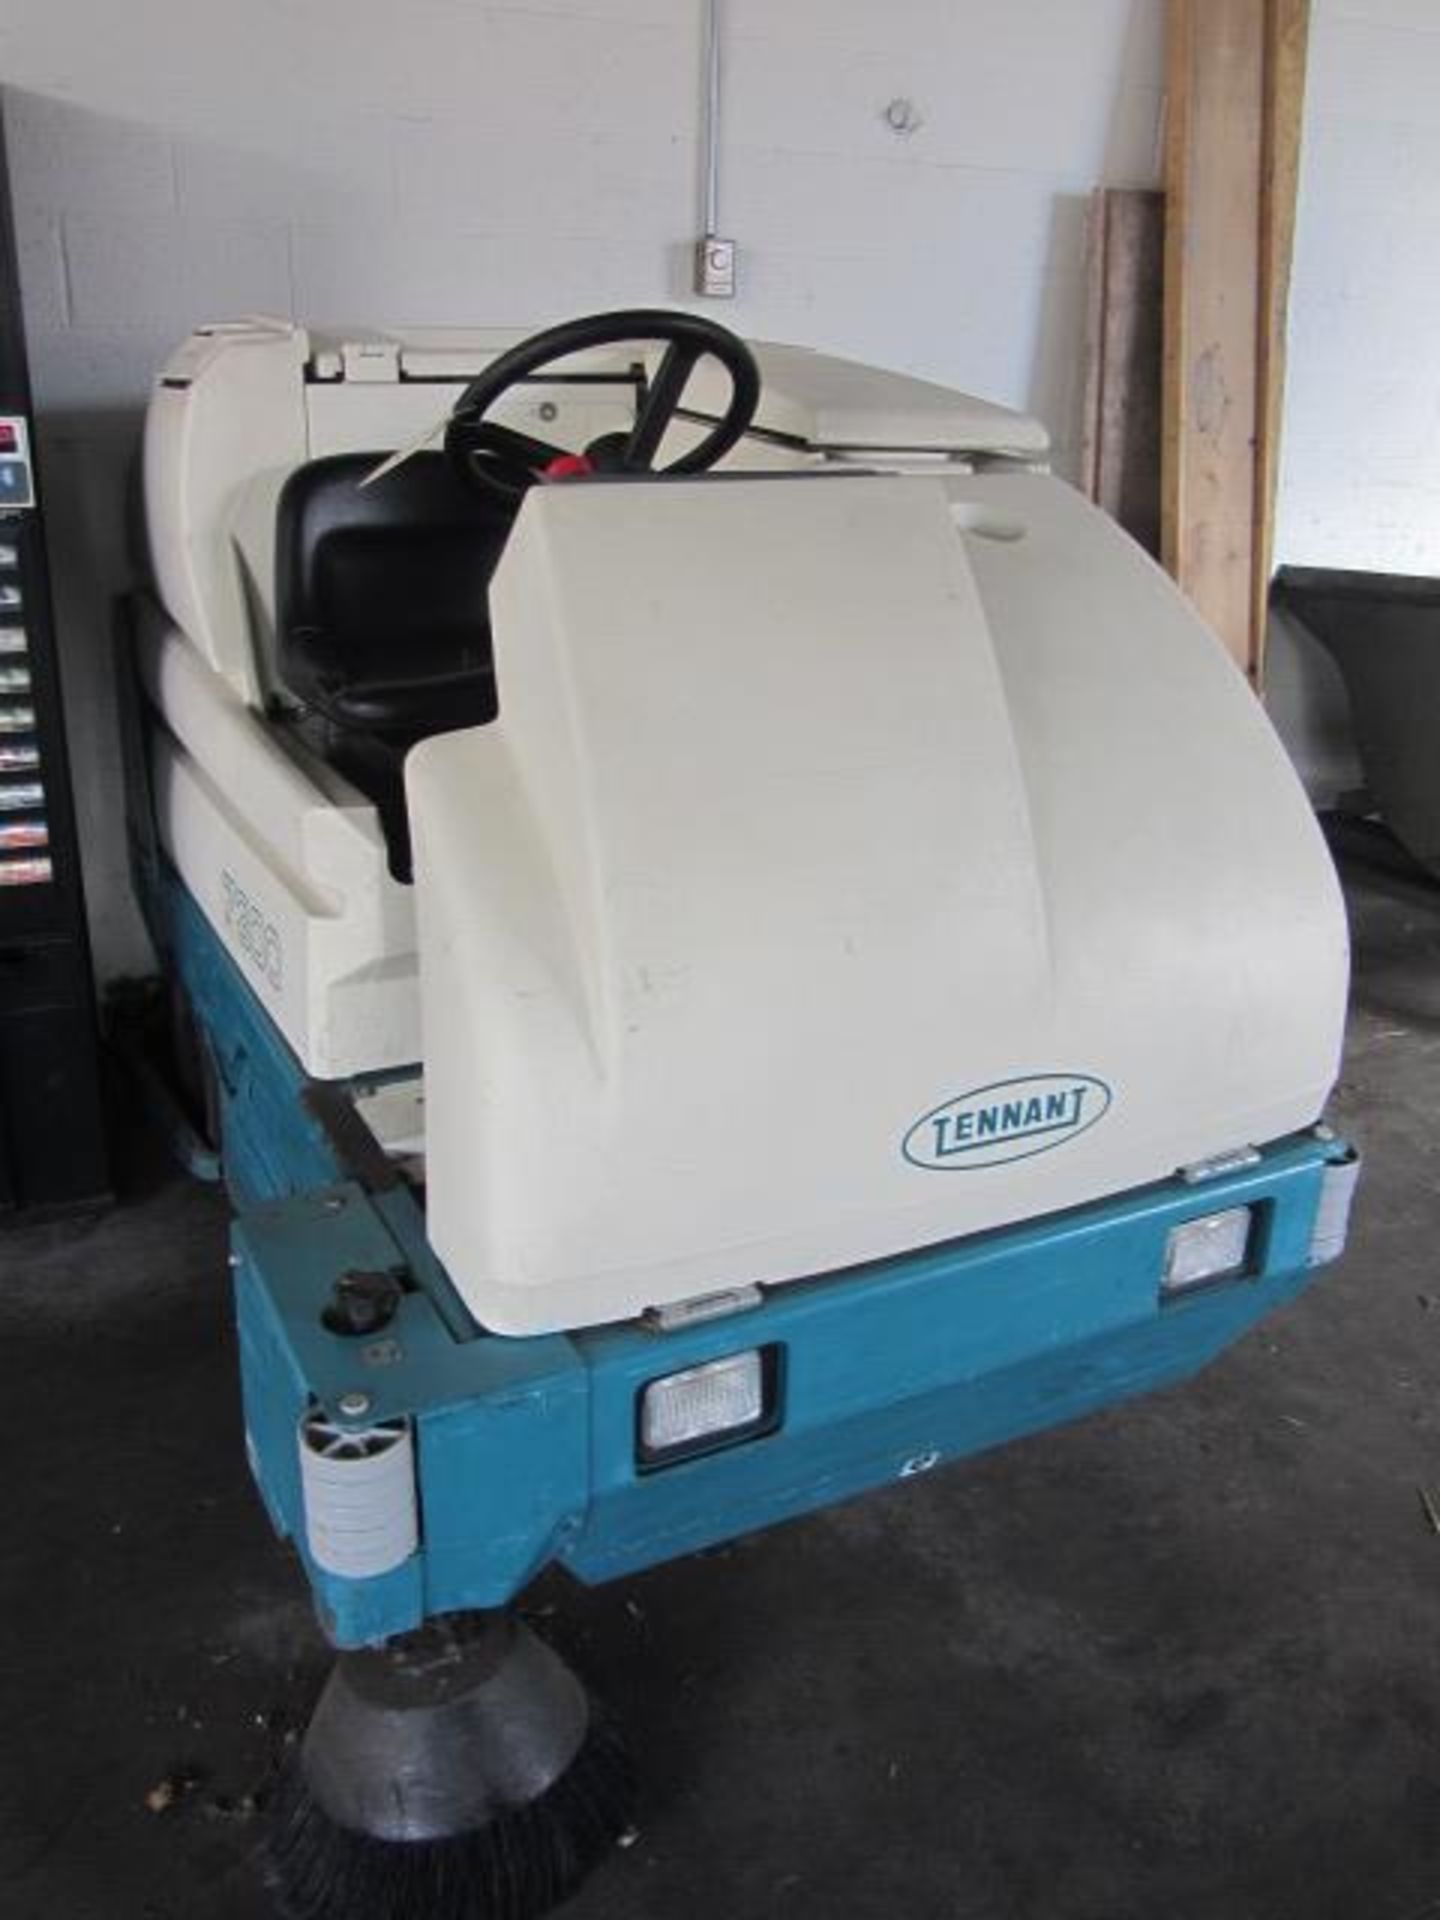 Tennant 7300 Disk Riding Floor Scrubber with 40'' Path, Readout, sn:7300-3310 - Image 5 of 7